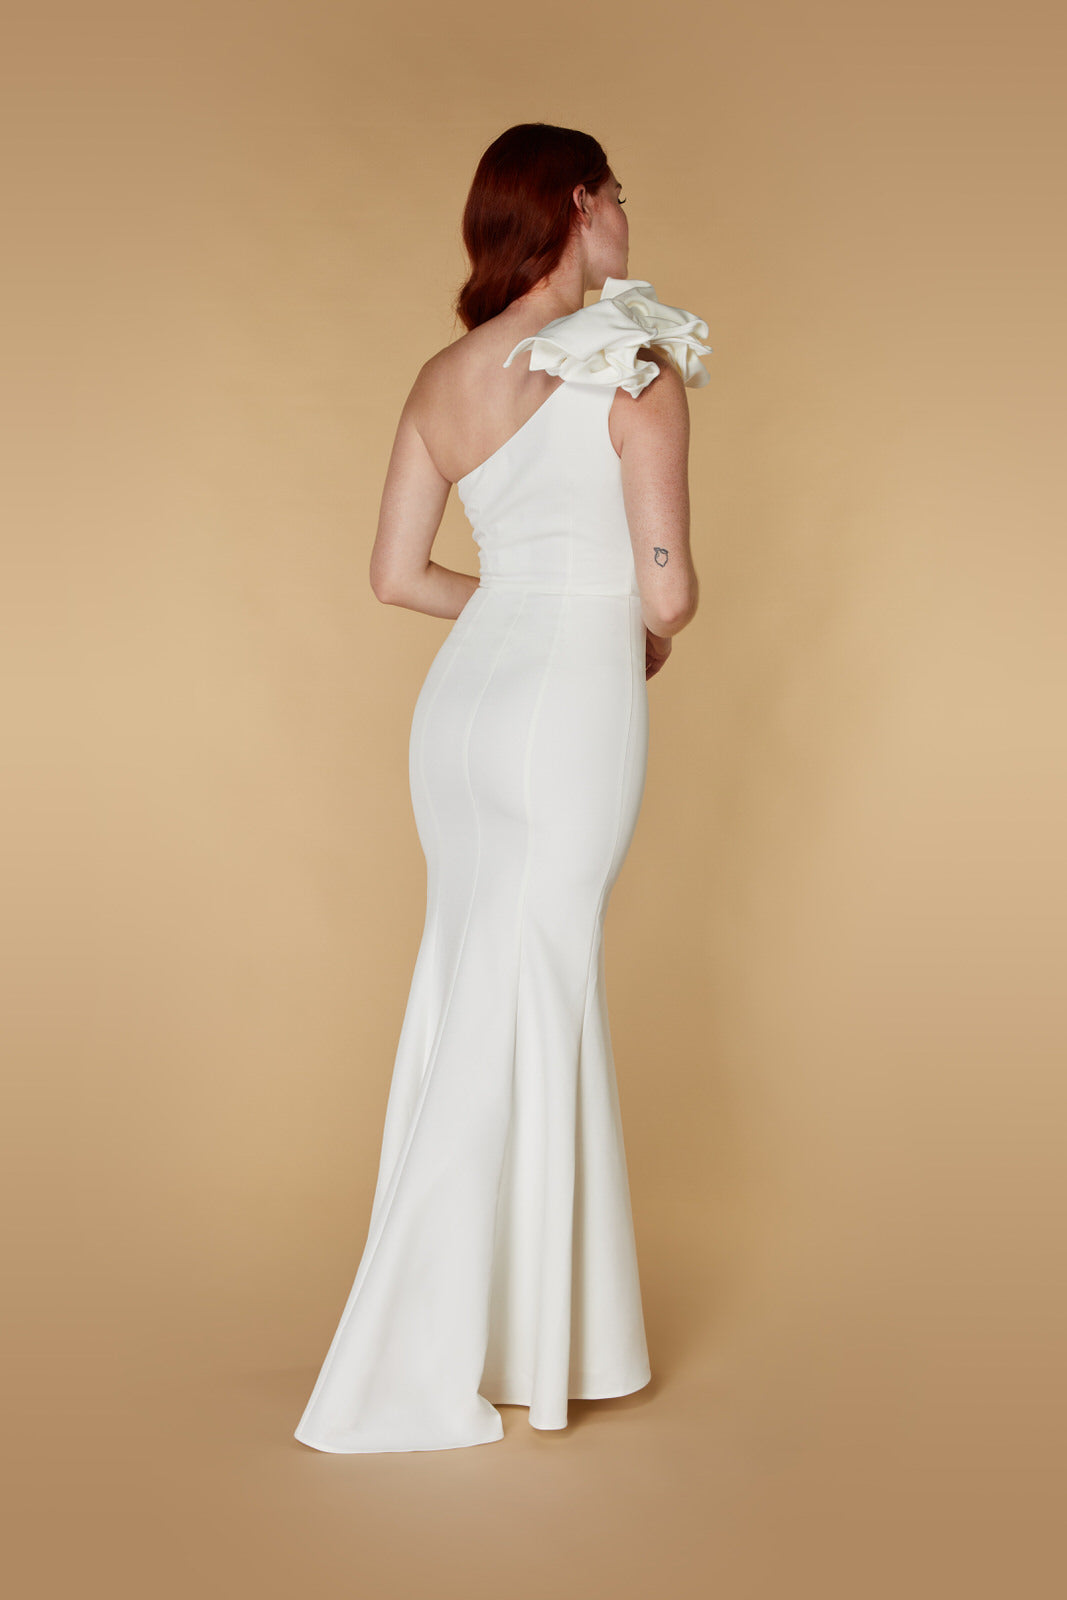 Jarlo Petal one shoulder ivory maxi dress with corsage detail